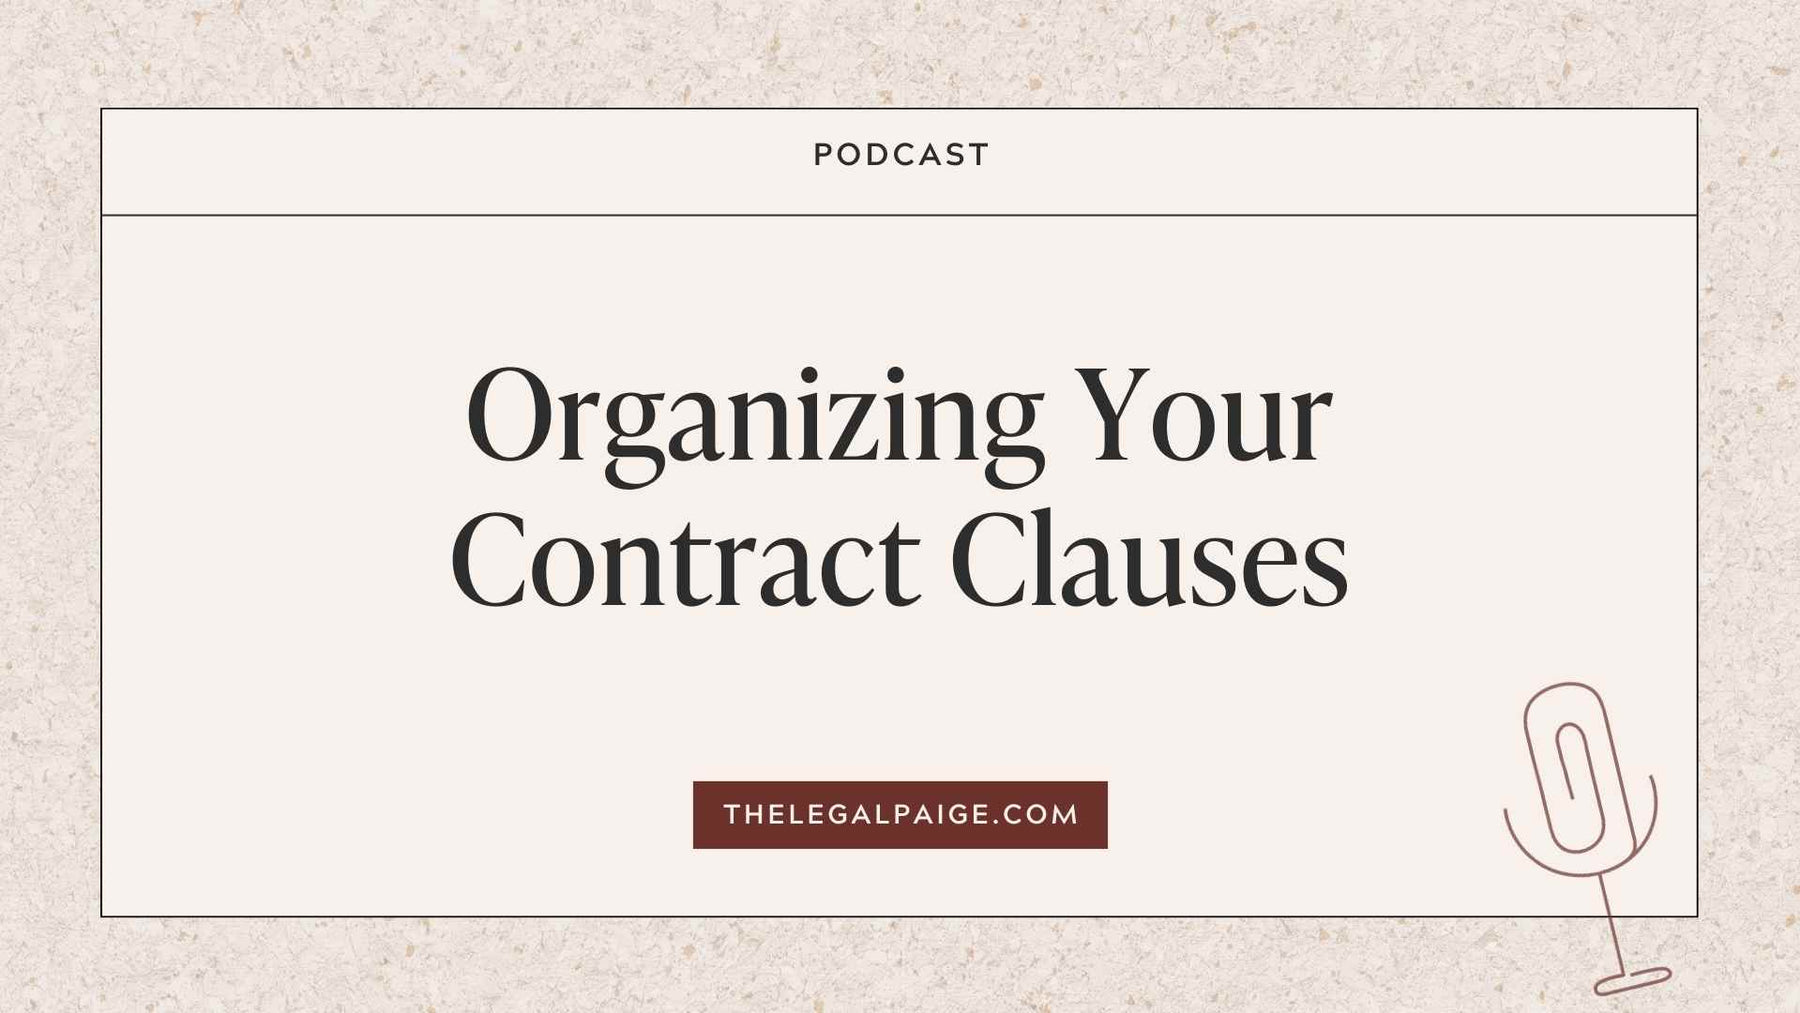 Episode 35: Organizing Your Contract Clauses